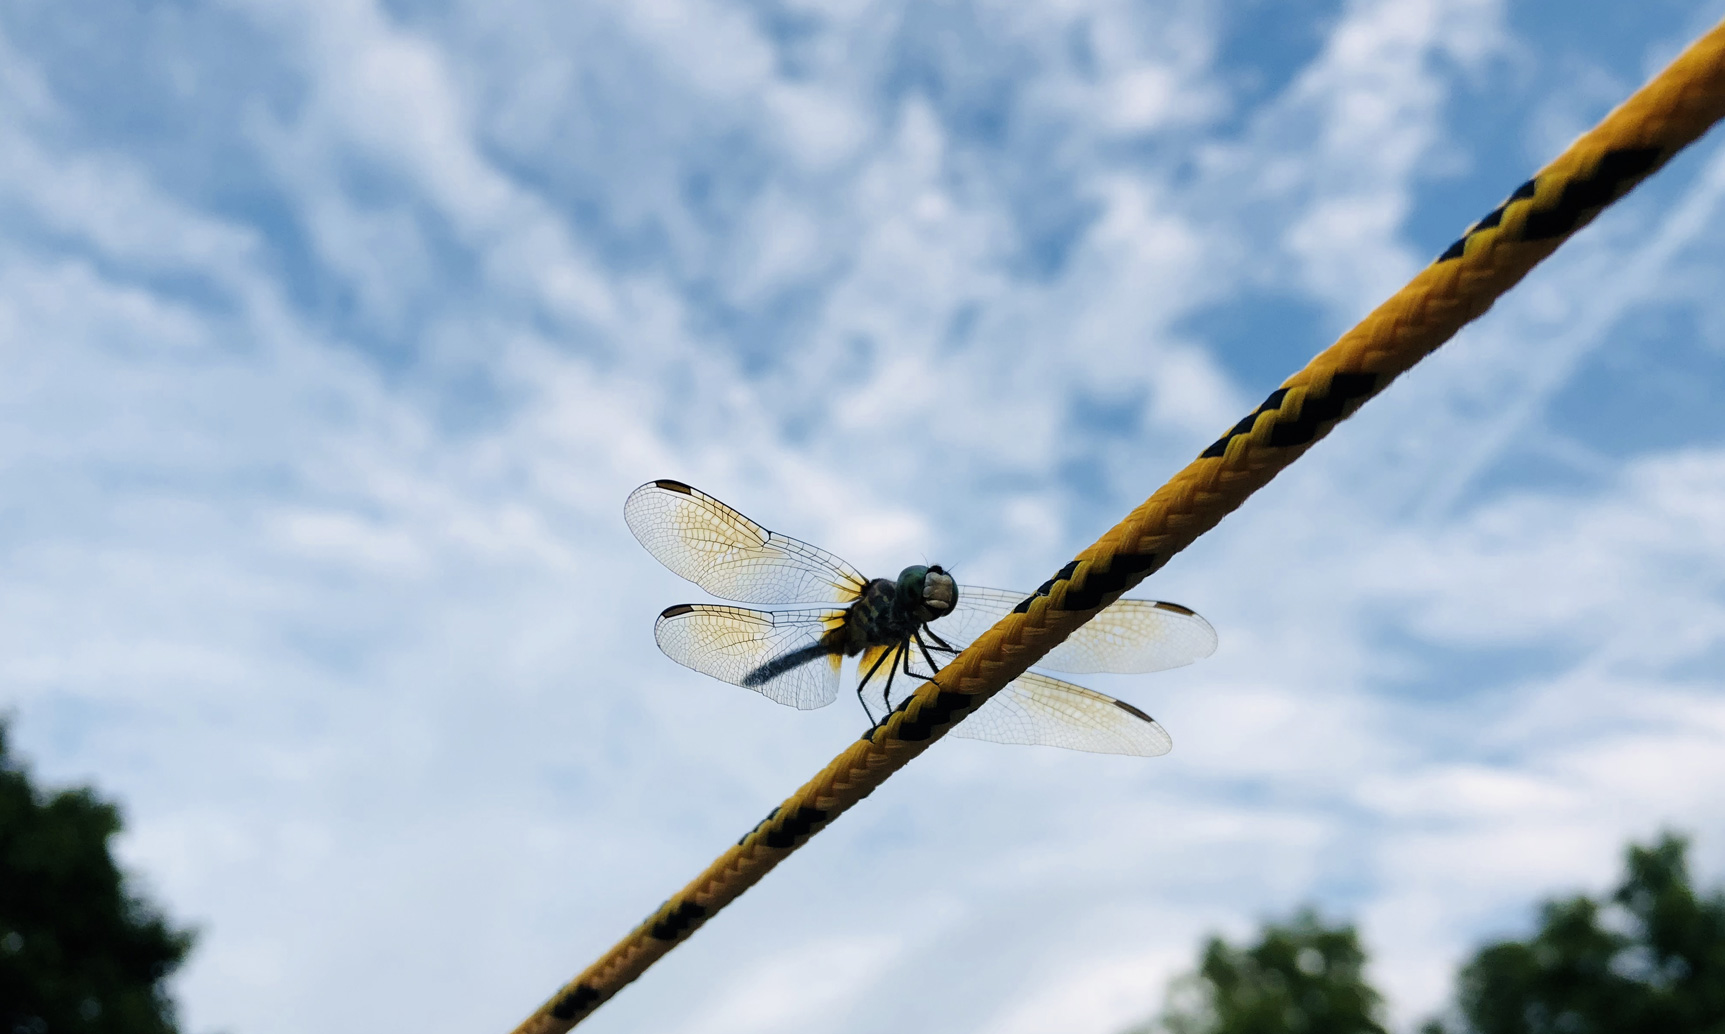 Hussagram: Follow this dragonfly to Future Fest!